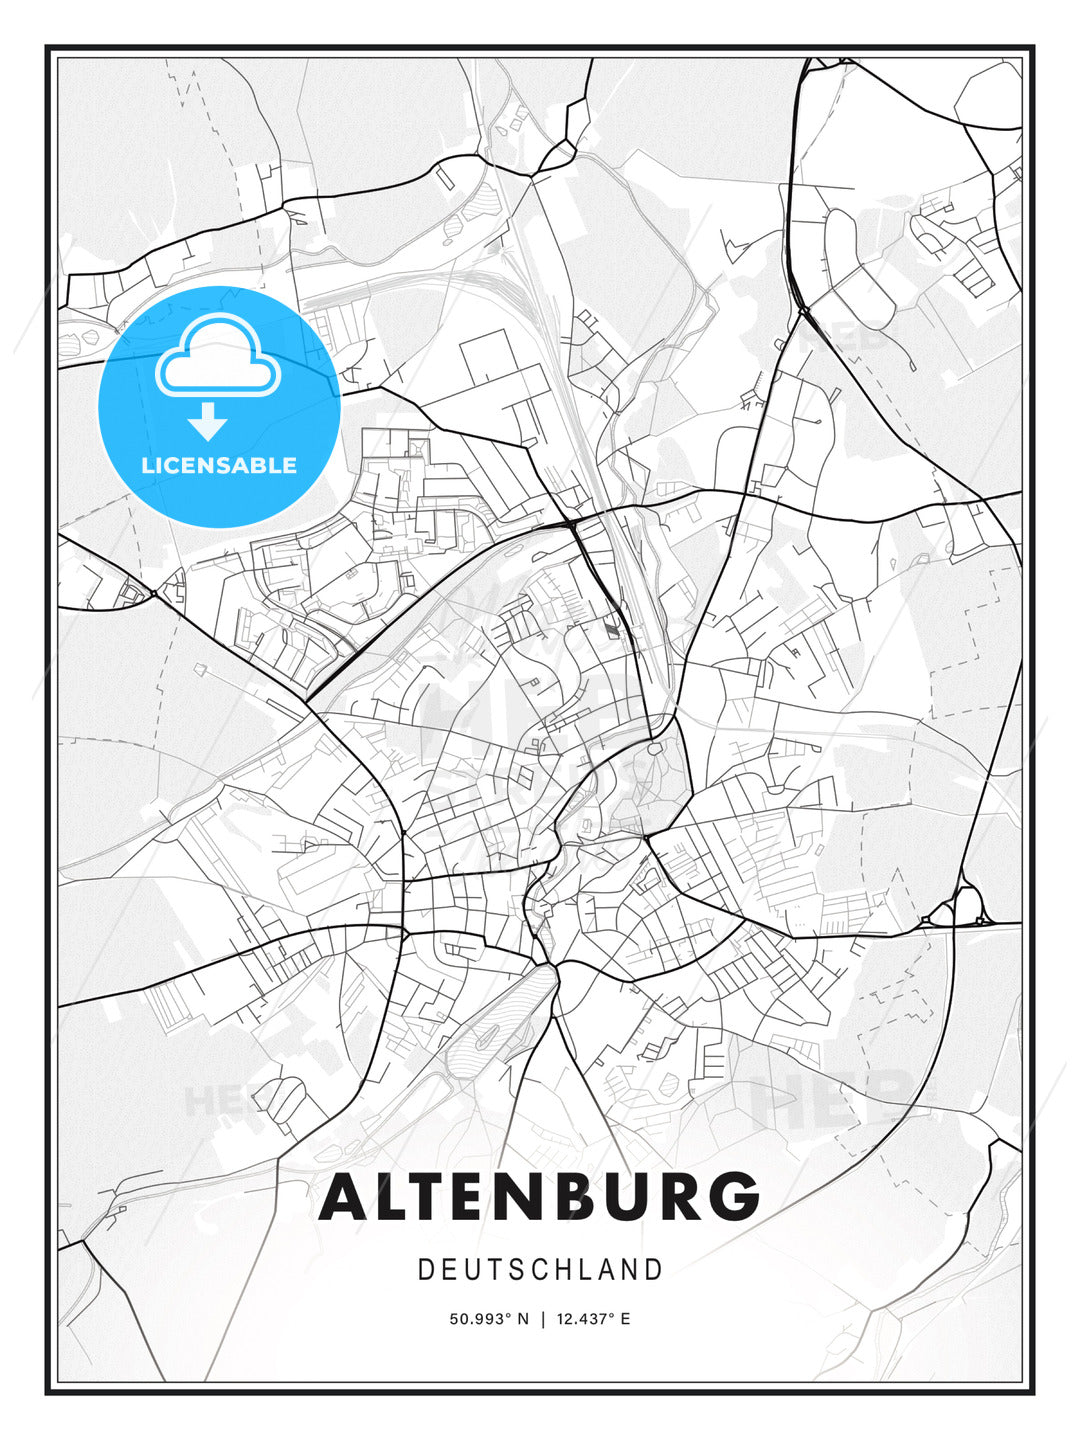 Altenburg, Germany, Modern Print Template in Various Formats - HEBSTREITS Sketches